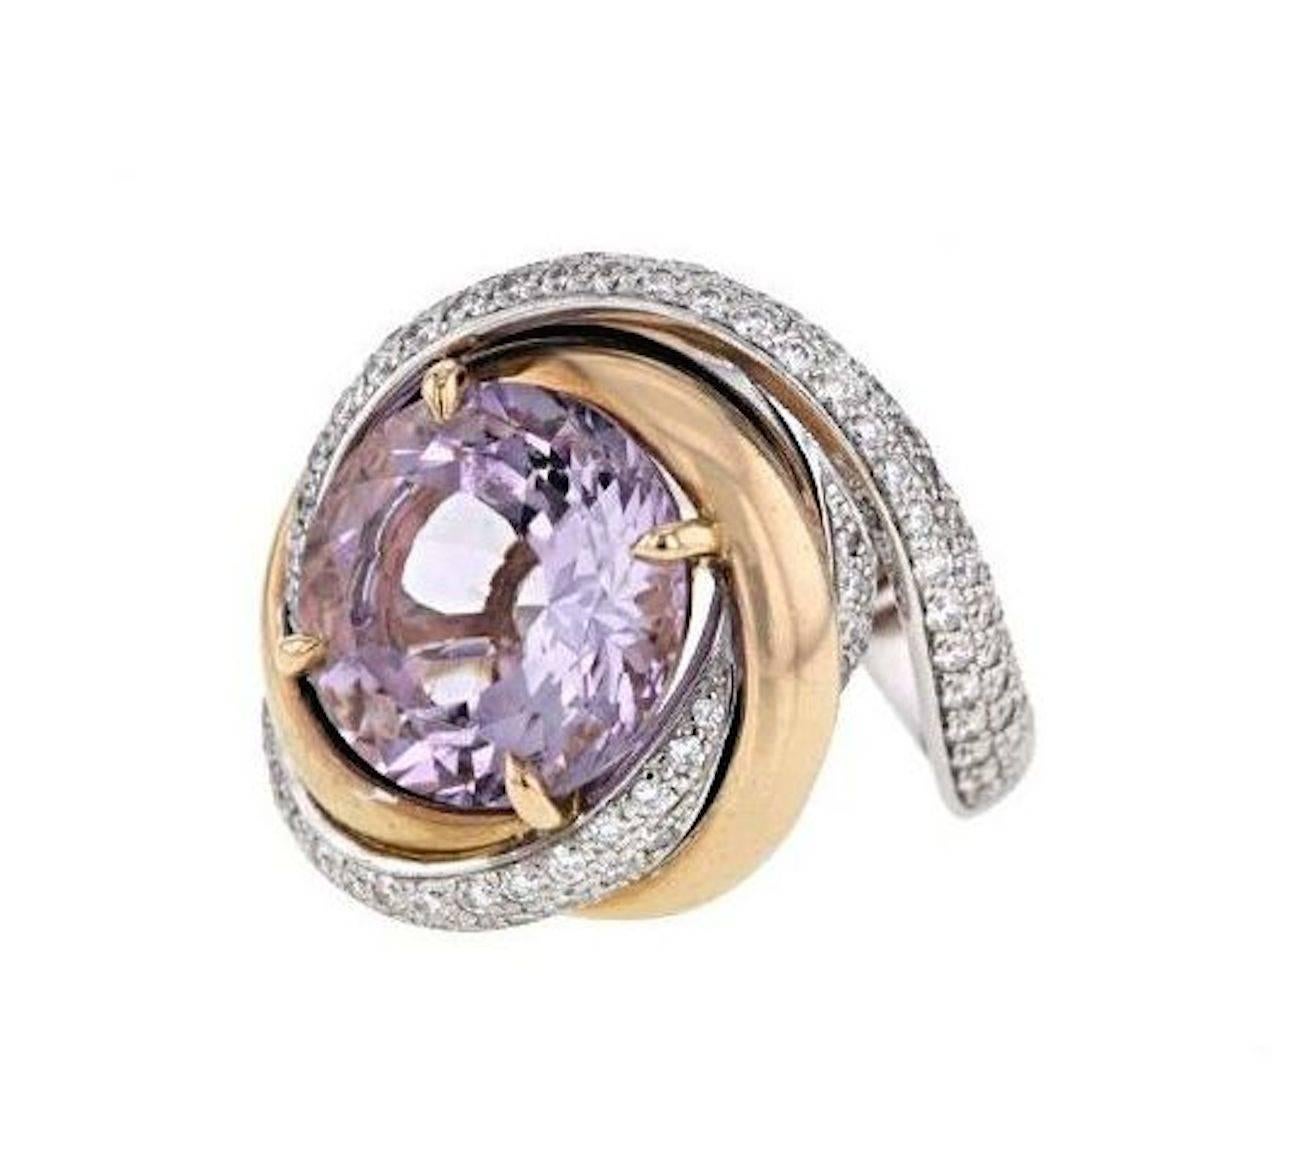 CARTIER 2013 Ring in white and pink gold, round amethyst, diamonds, signed and numbered, ring size 5 ½, (18,65 grams)